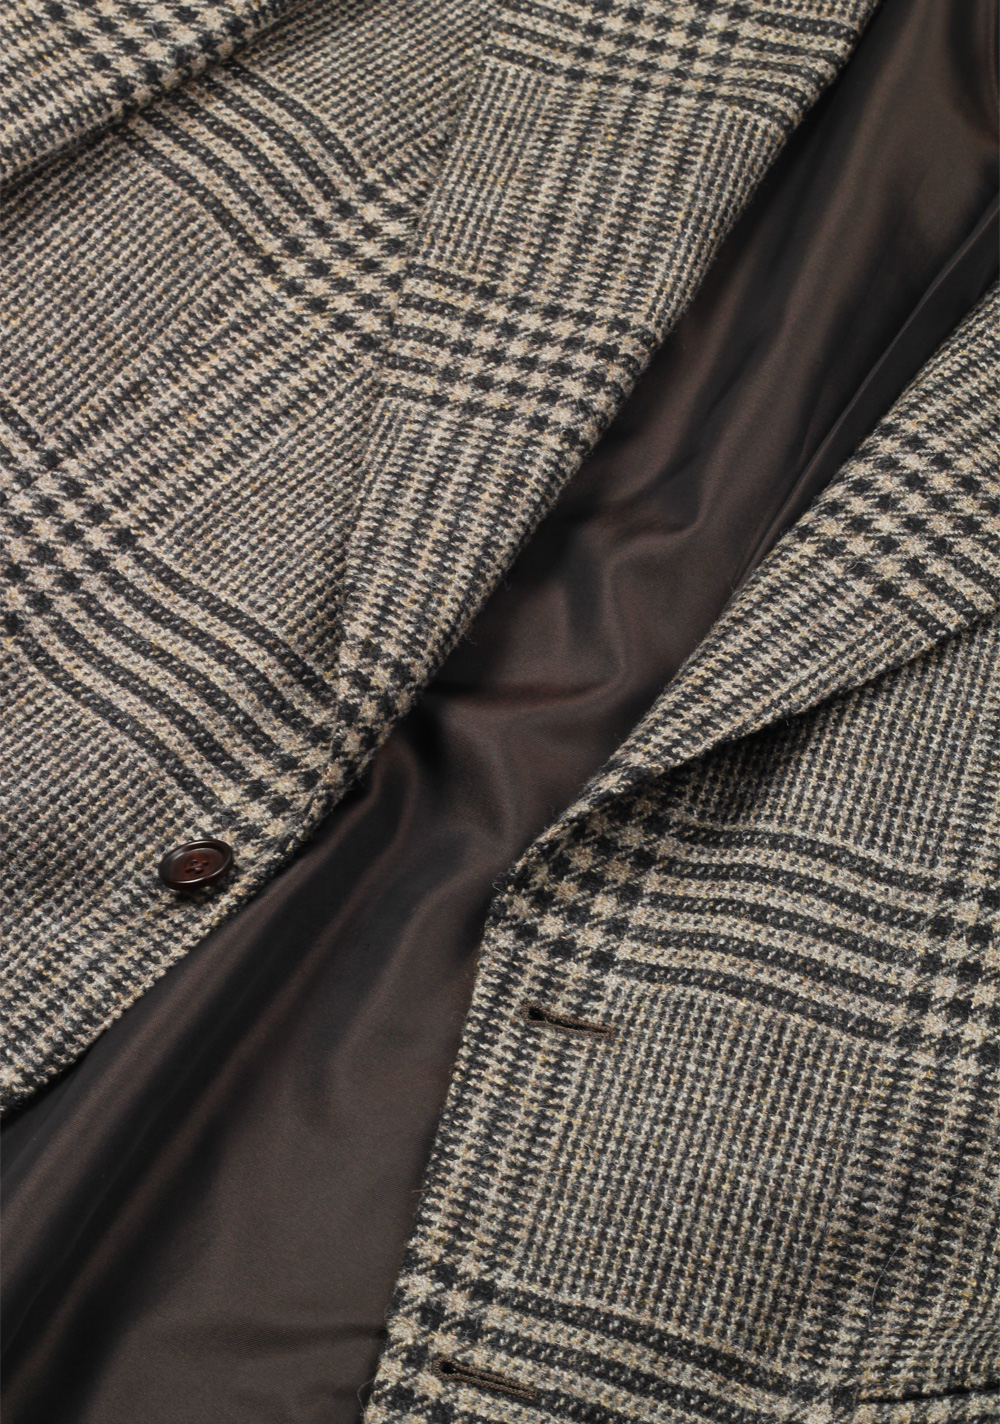 TOM FORD Shelton Checked Brown Sport Coat Size 54 / 44R U.S. In Wool Cashmere | Costume Limité